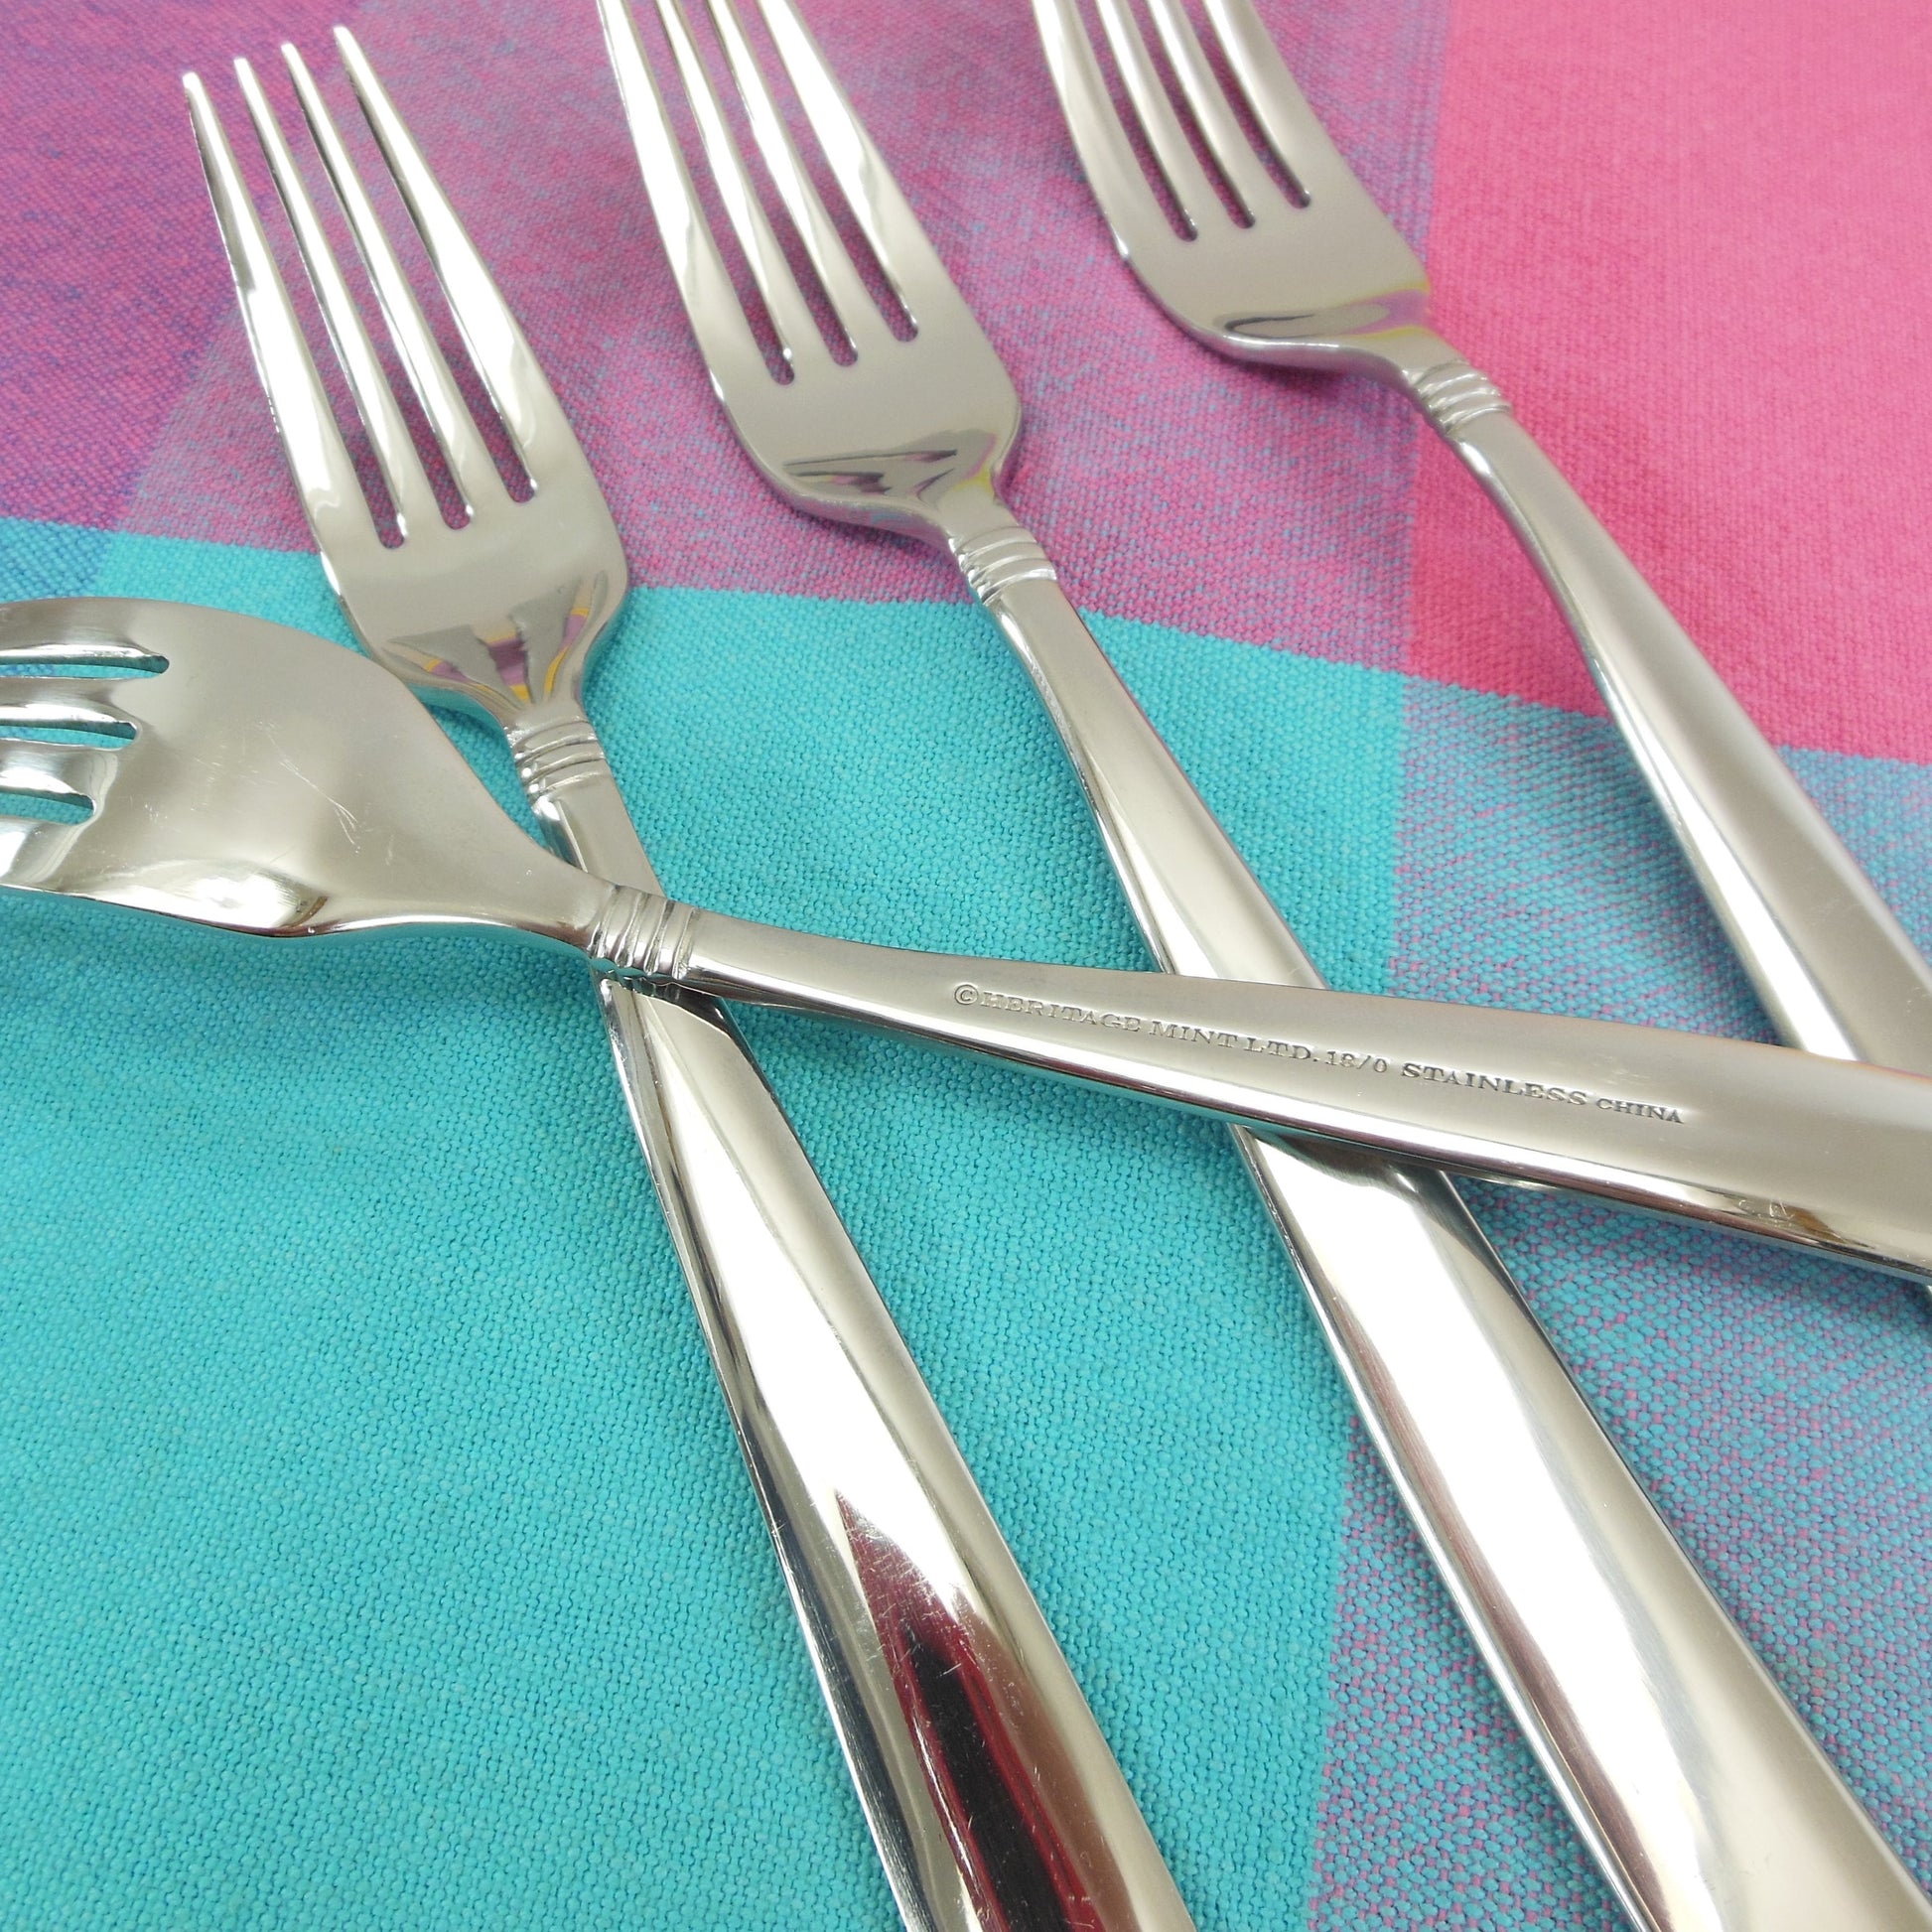 Heritage Mint Ltd. Simplicity Stainless - 4 Dinner Forks Used